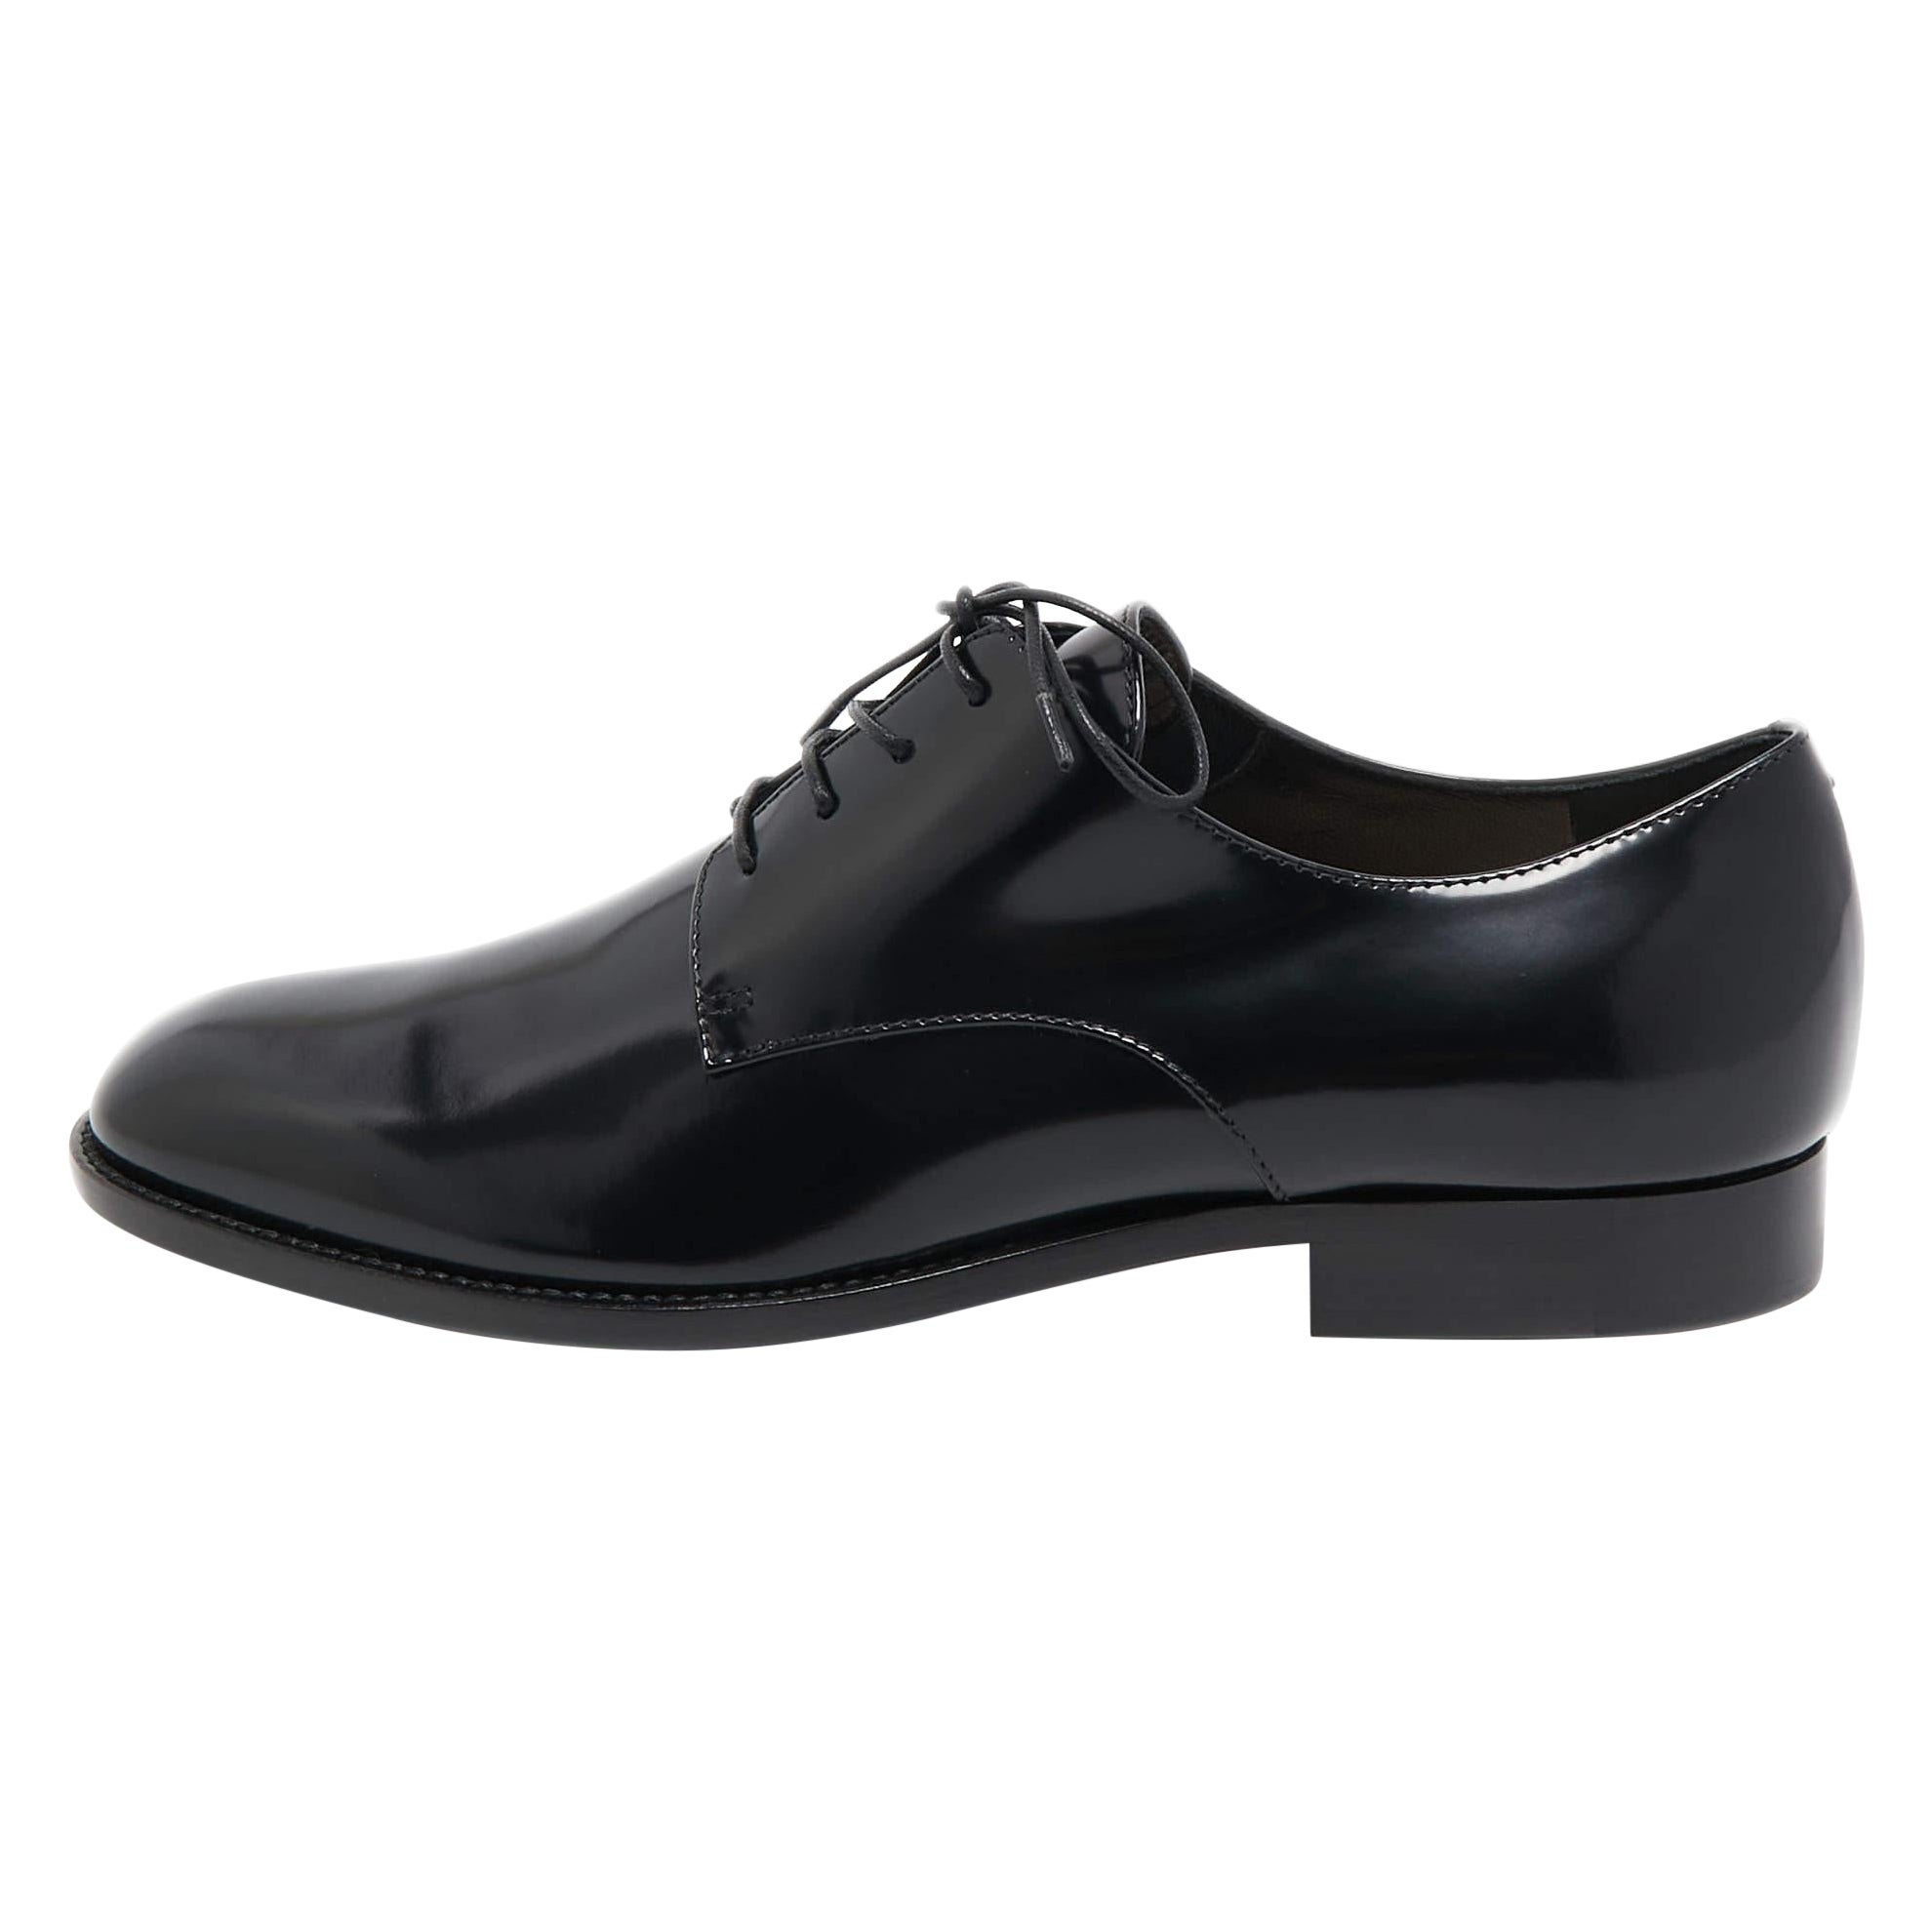 Christian Dior Black Leather Oxfords Size 37.5